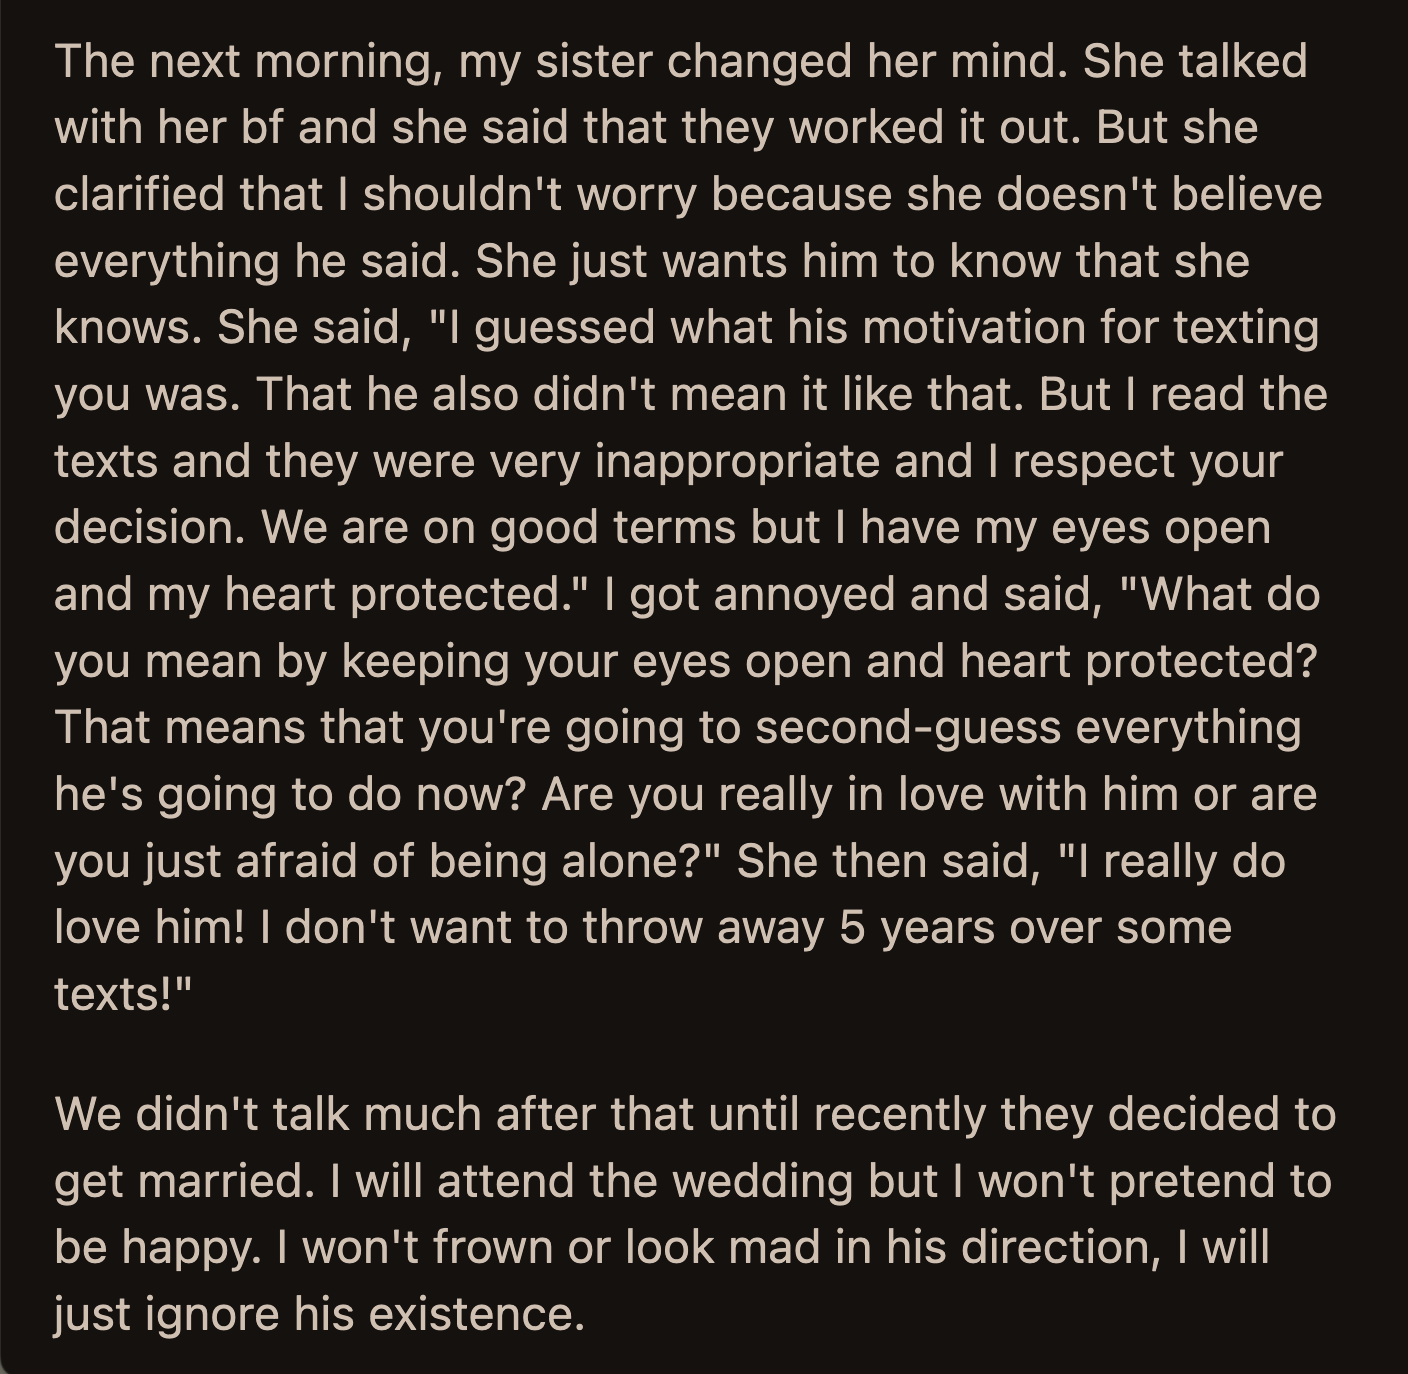 OP's relationship with his sister was chilly after that. The couple announced their engagement recently. OP said he would go but pretend his BIL doesn't exist.